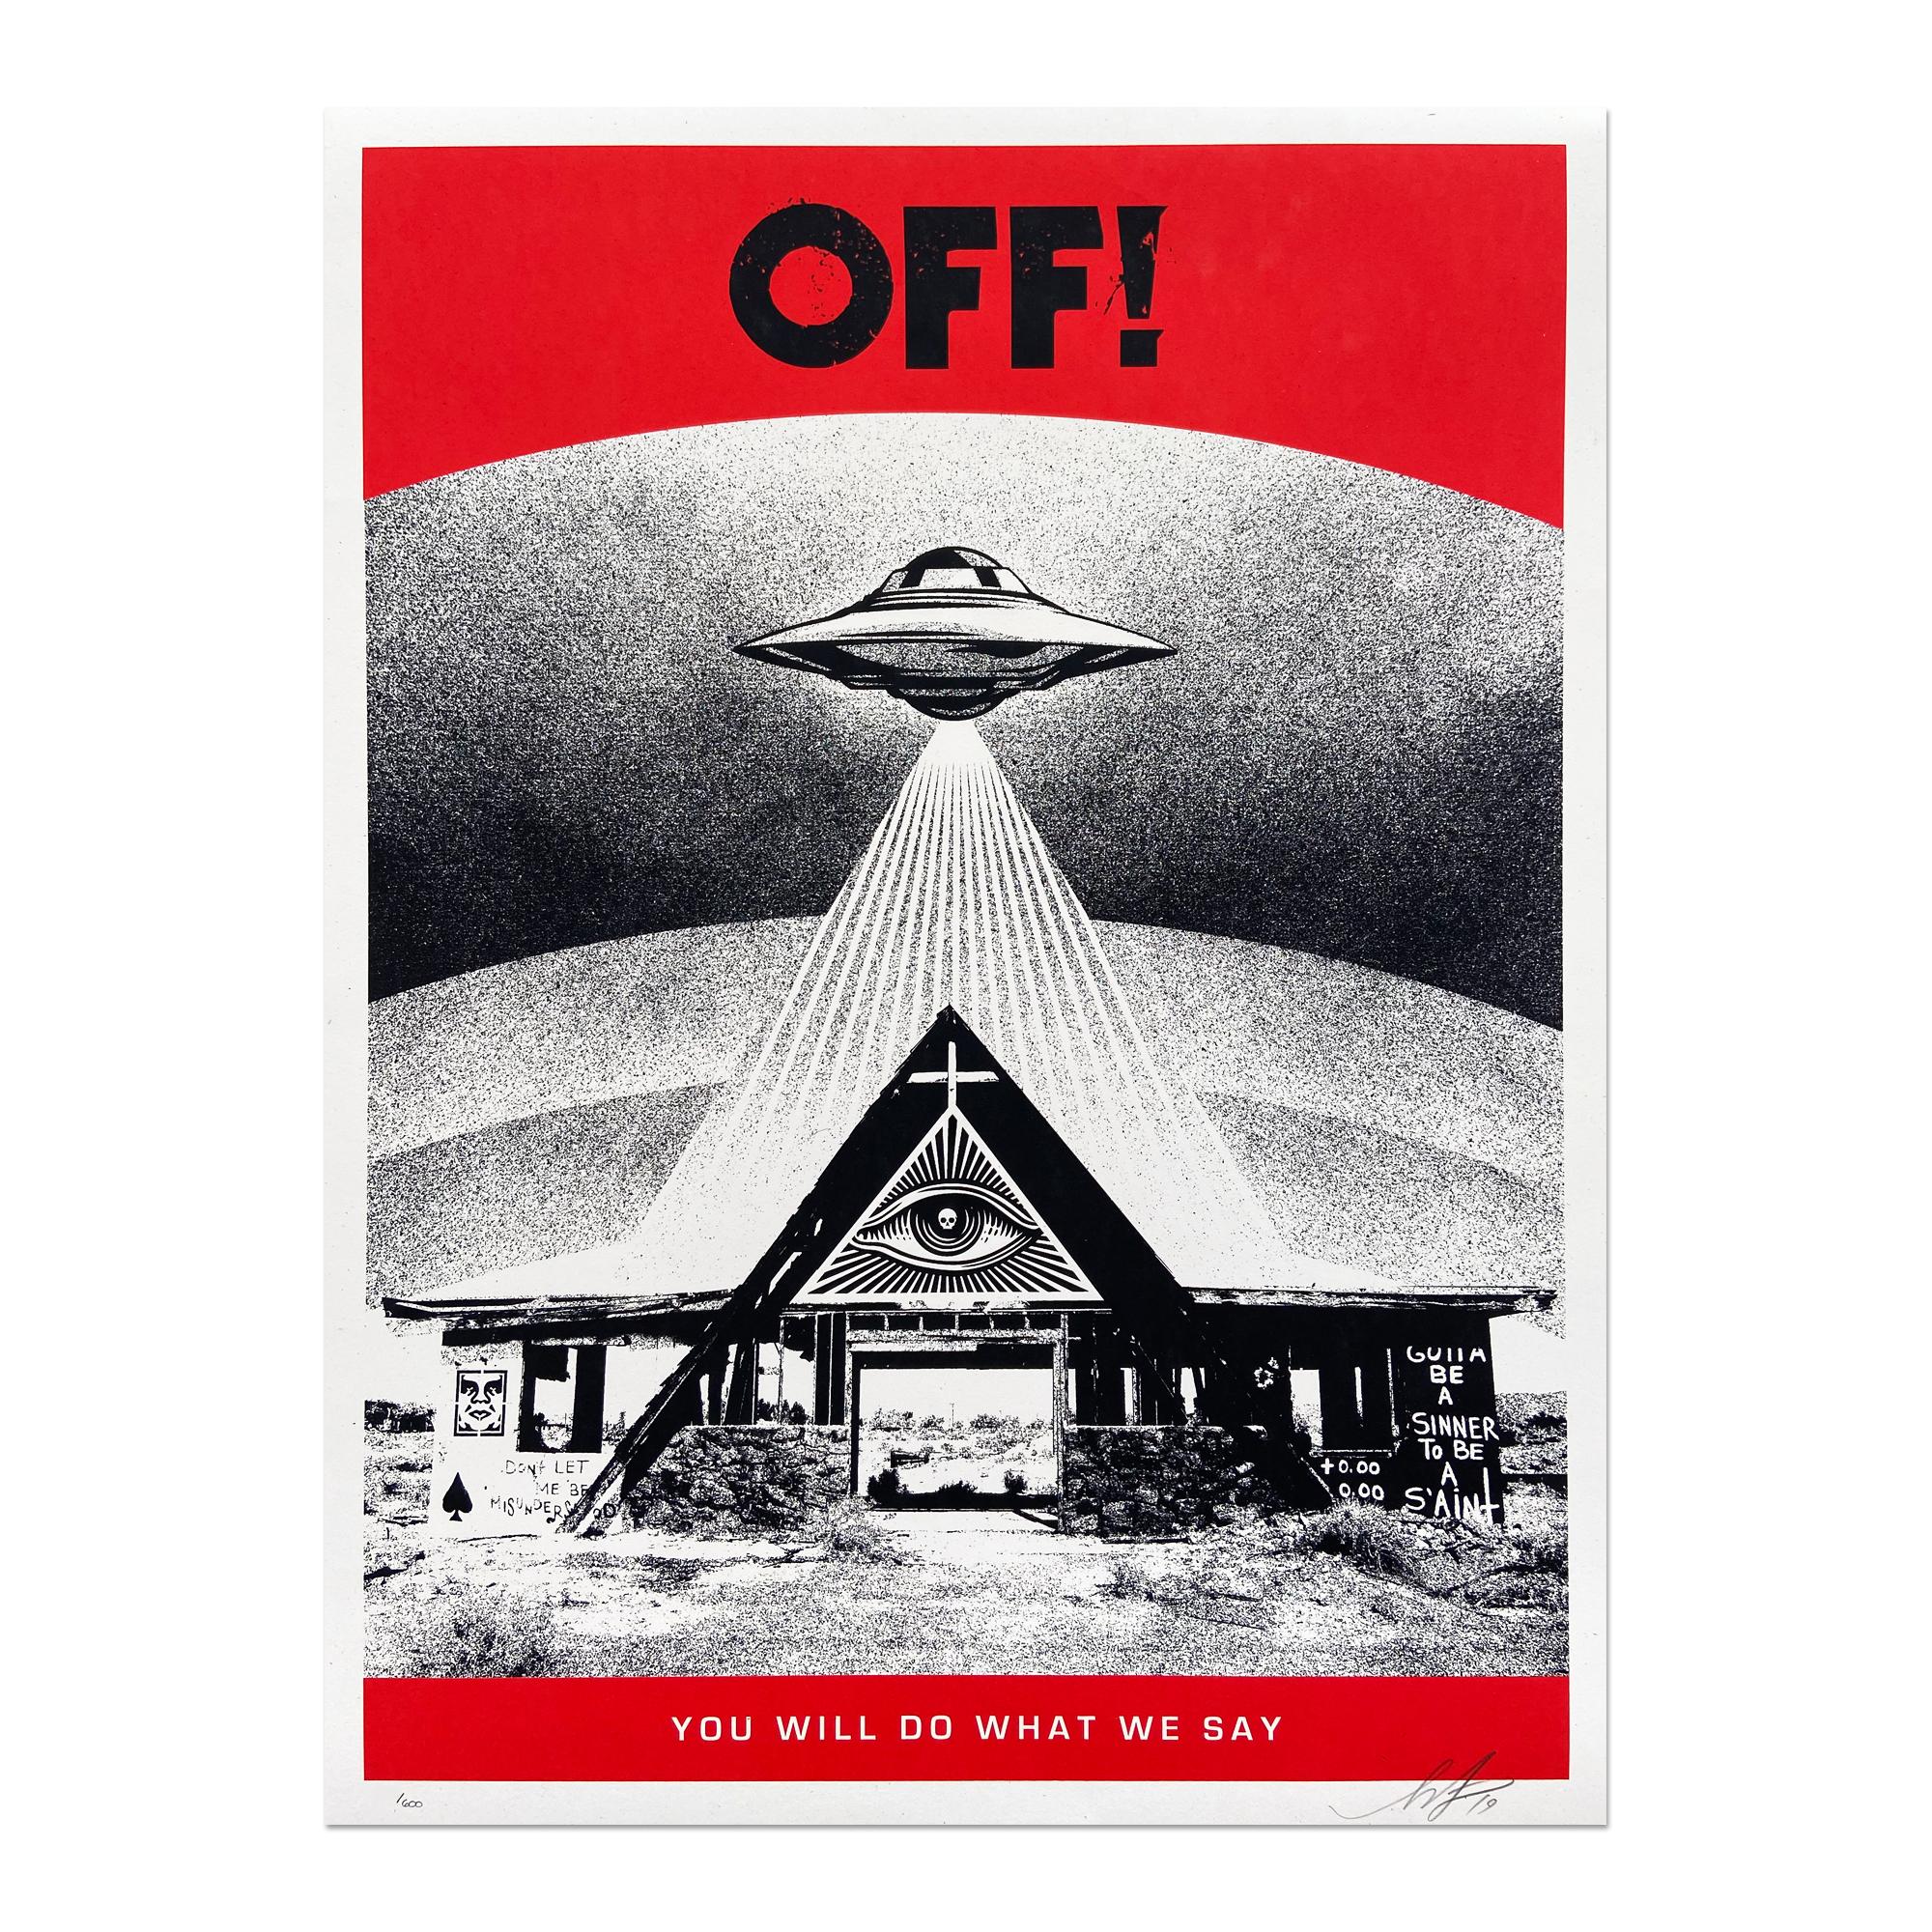 Shepard Fairey
OFF! You Will Do What We Say, 2019
Medium: Screenprint on paper
Dimensions: 18 × 24 in (45.7 × 61 cm)
Edition of 600: Hand-signed and numbered
Condition: Mint